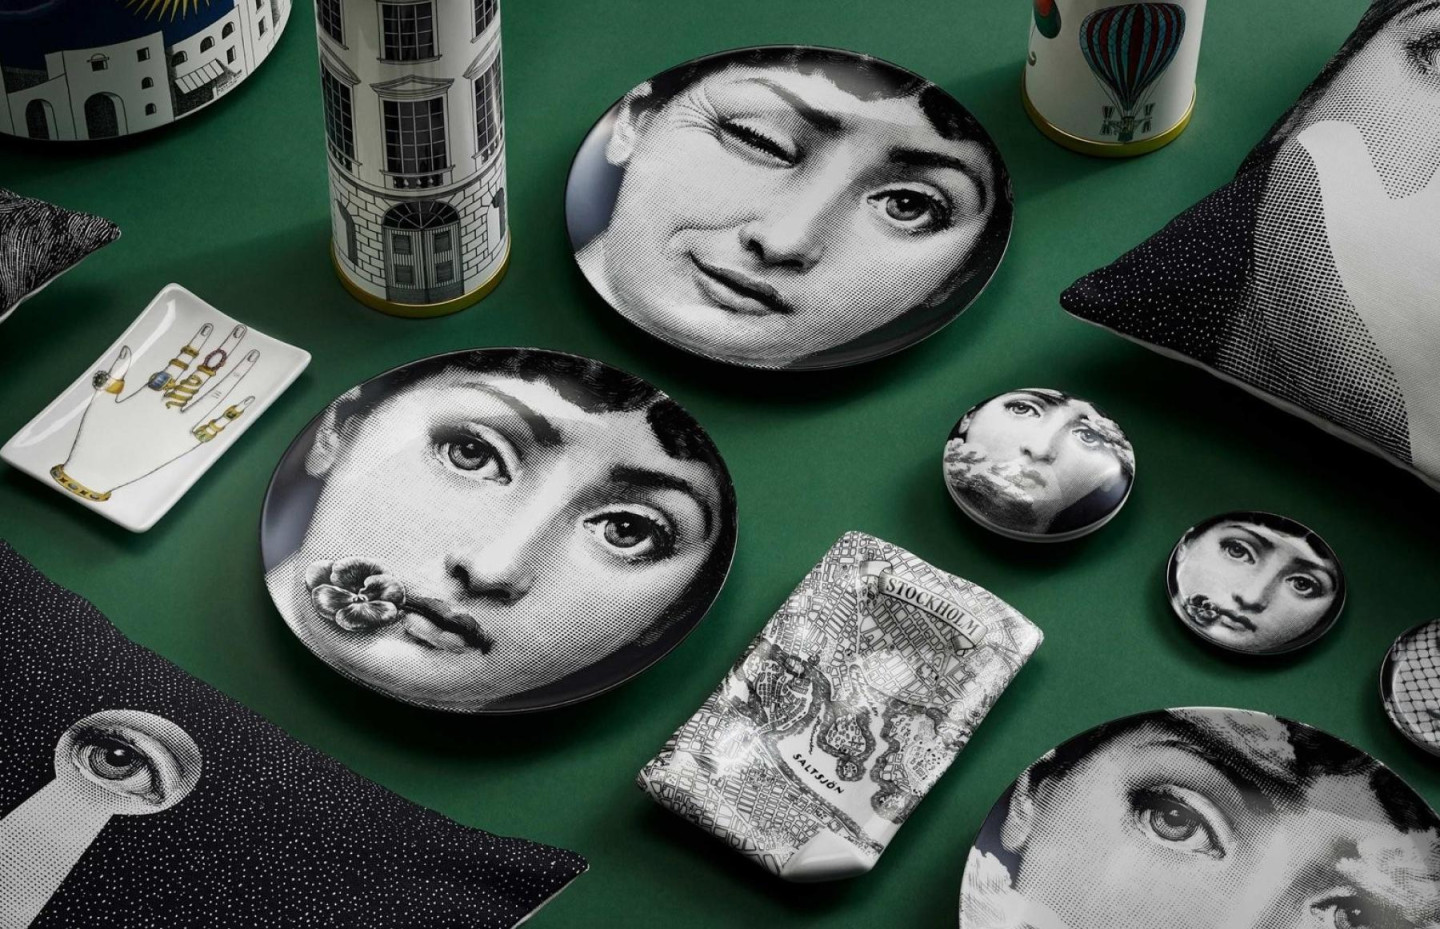 Mysterious muse and optical illusions: why we love the Fornasetti brand